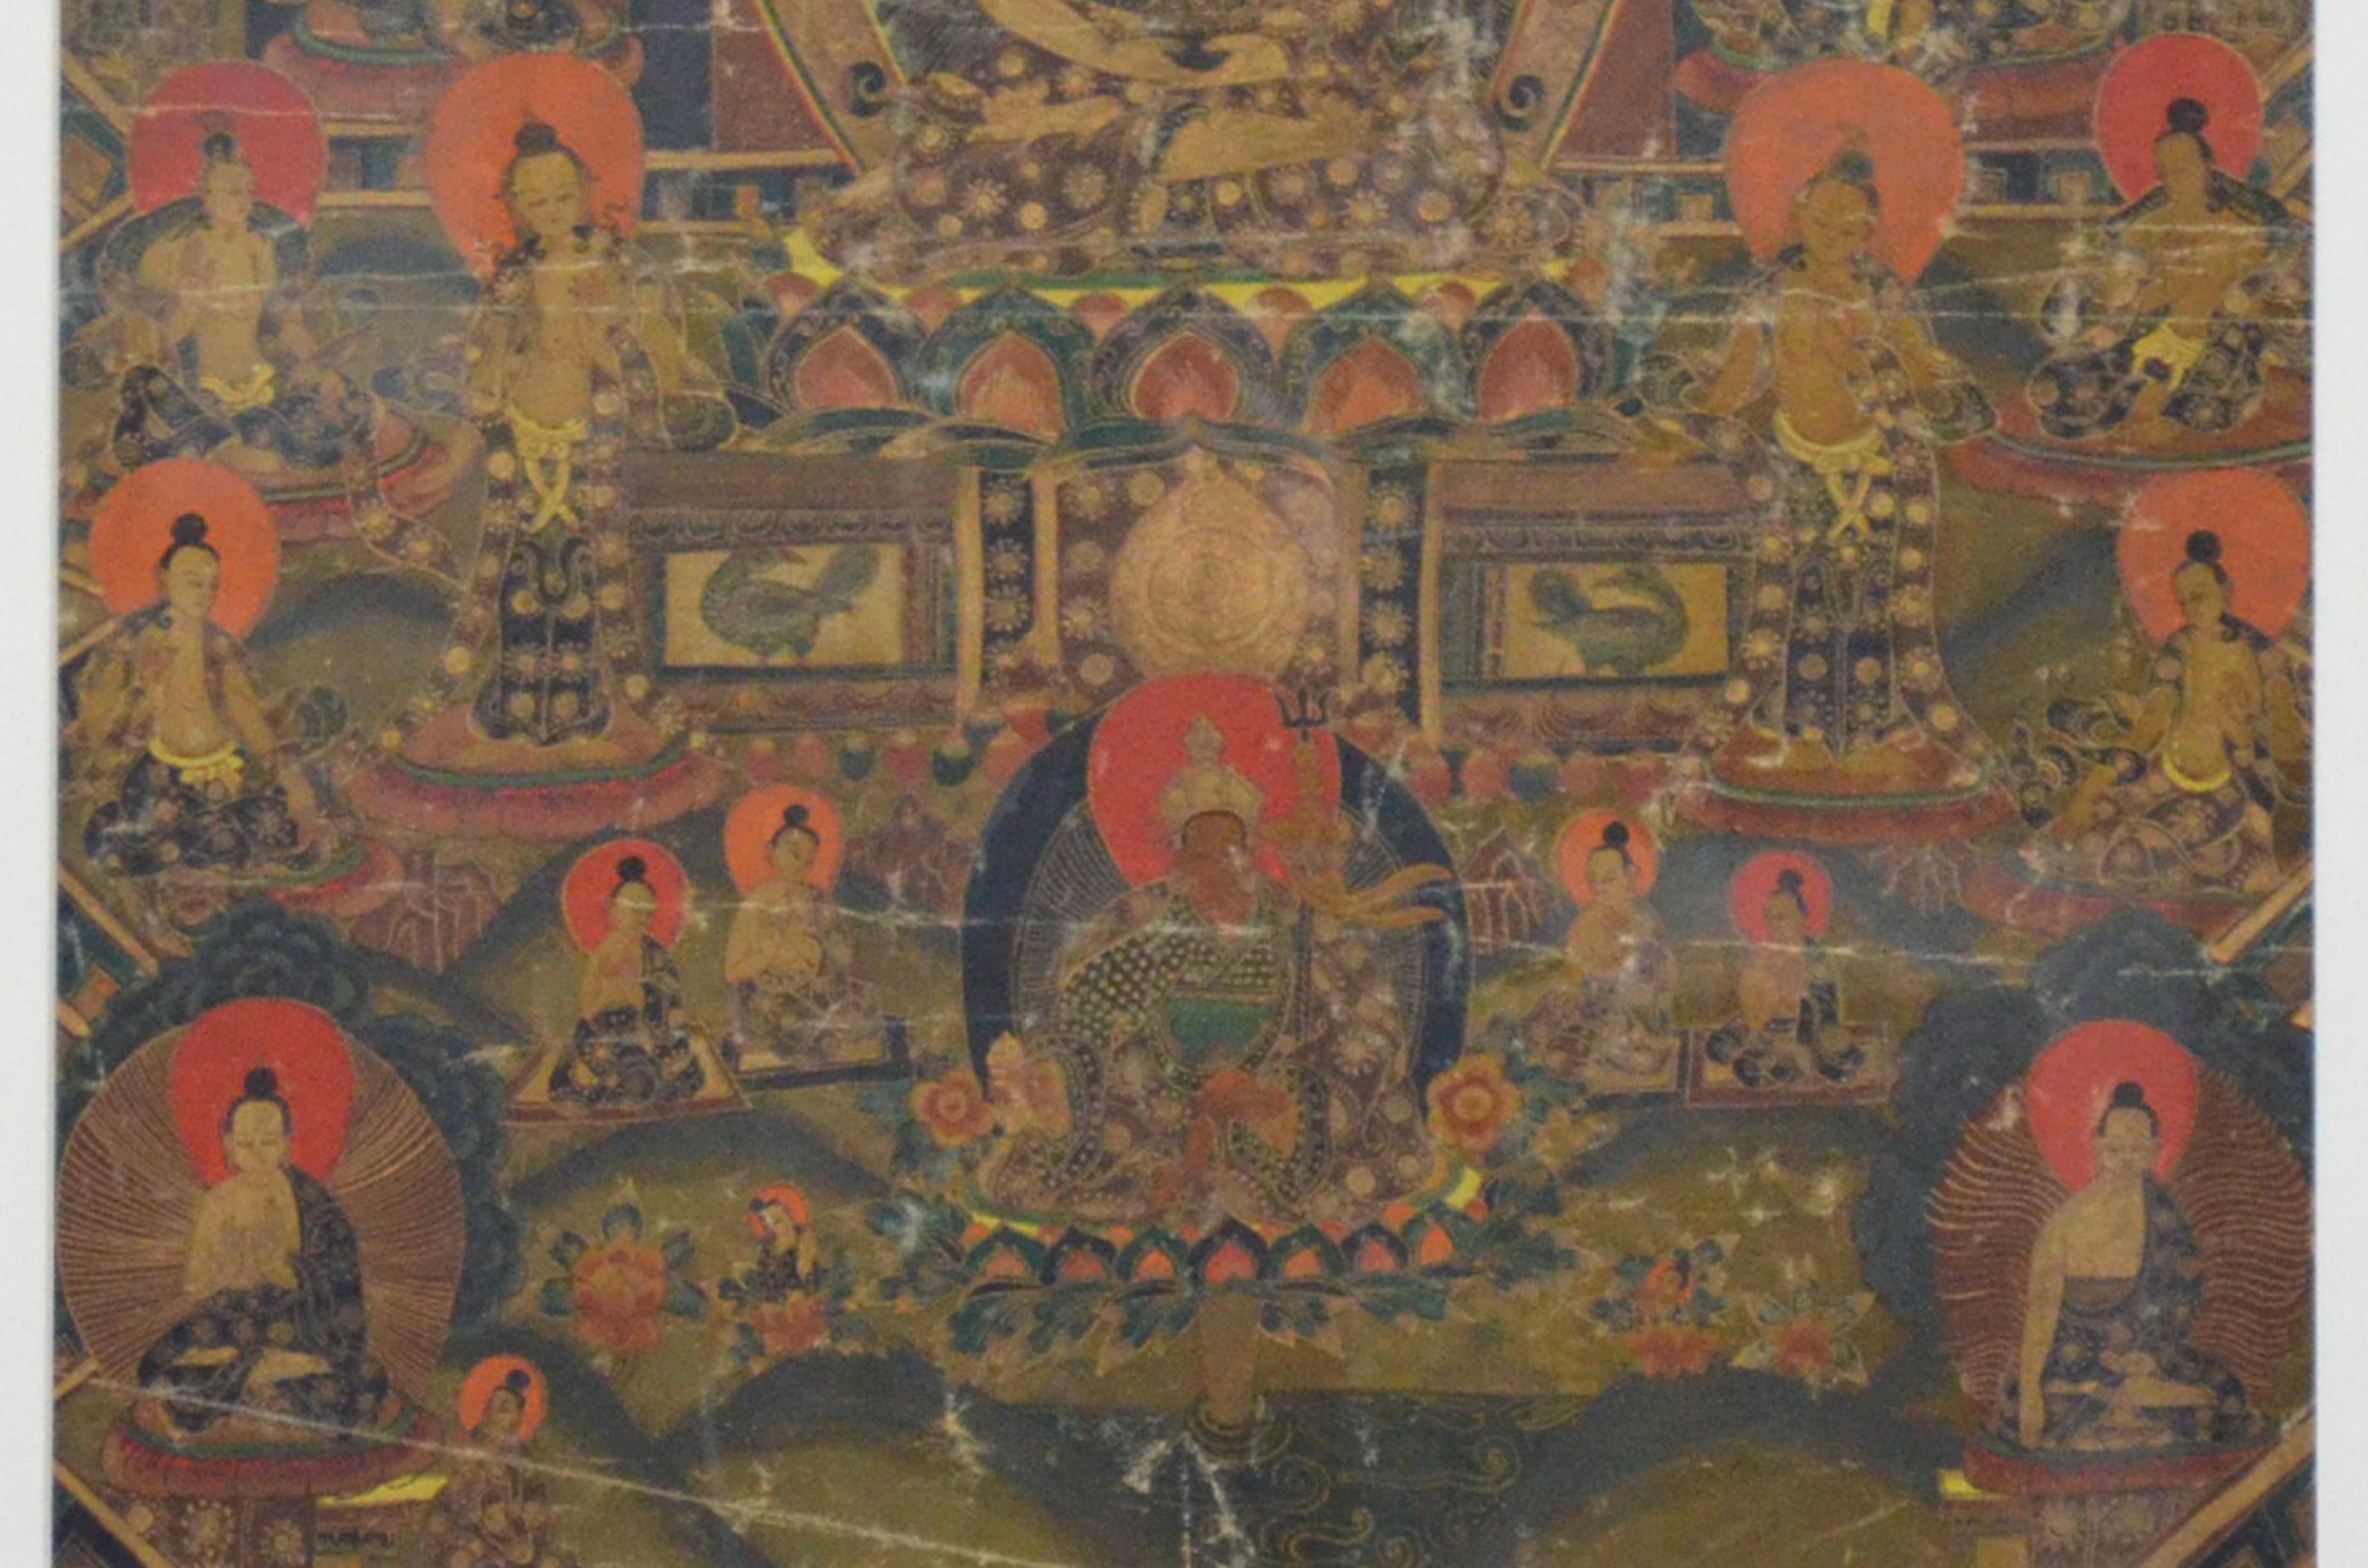 20th Century Vintage Hand-Painted Multi-Colored Tibetan Thangka Painting Depicting the Buddha